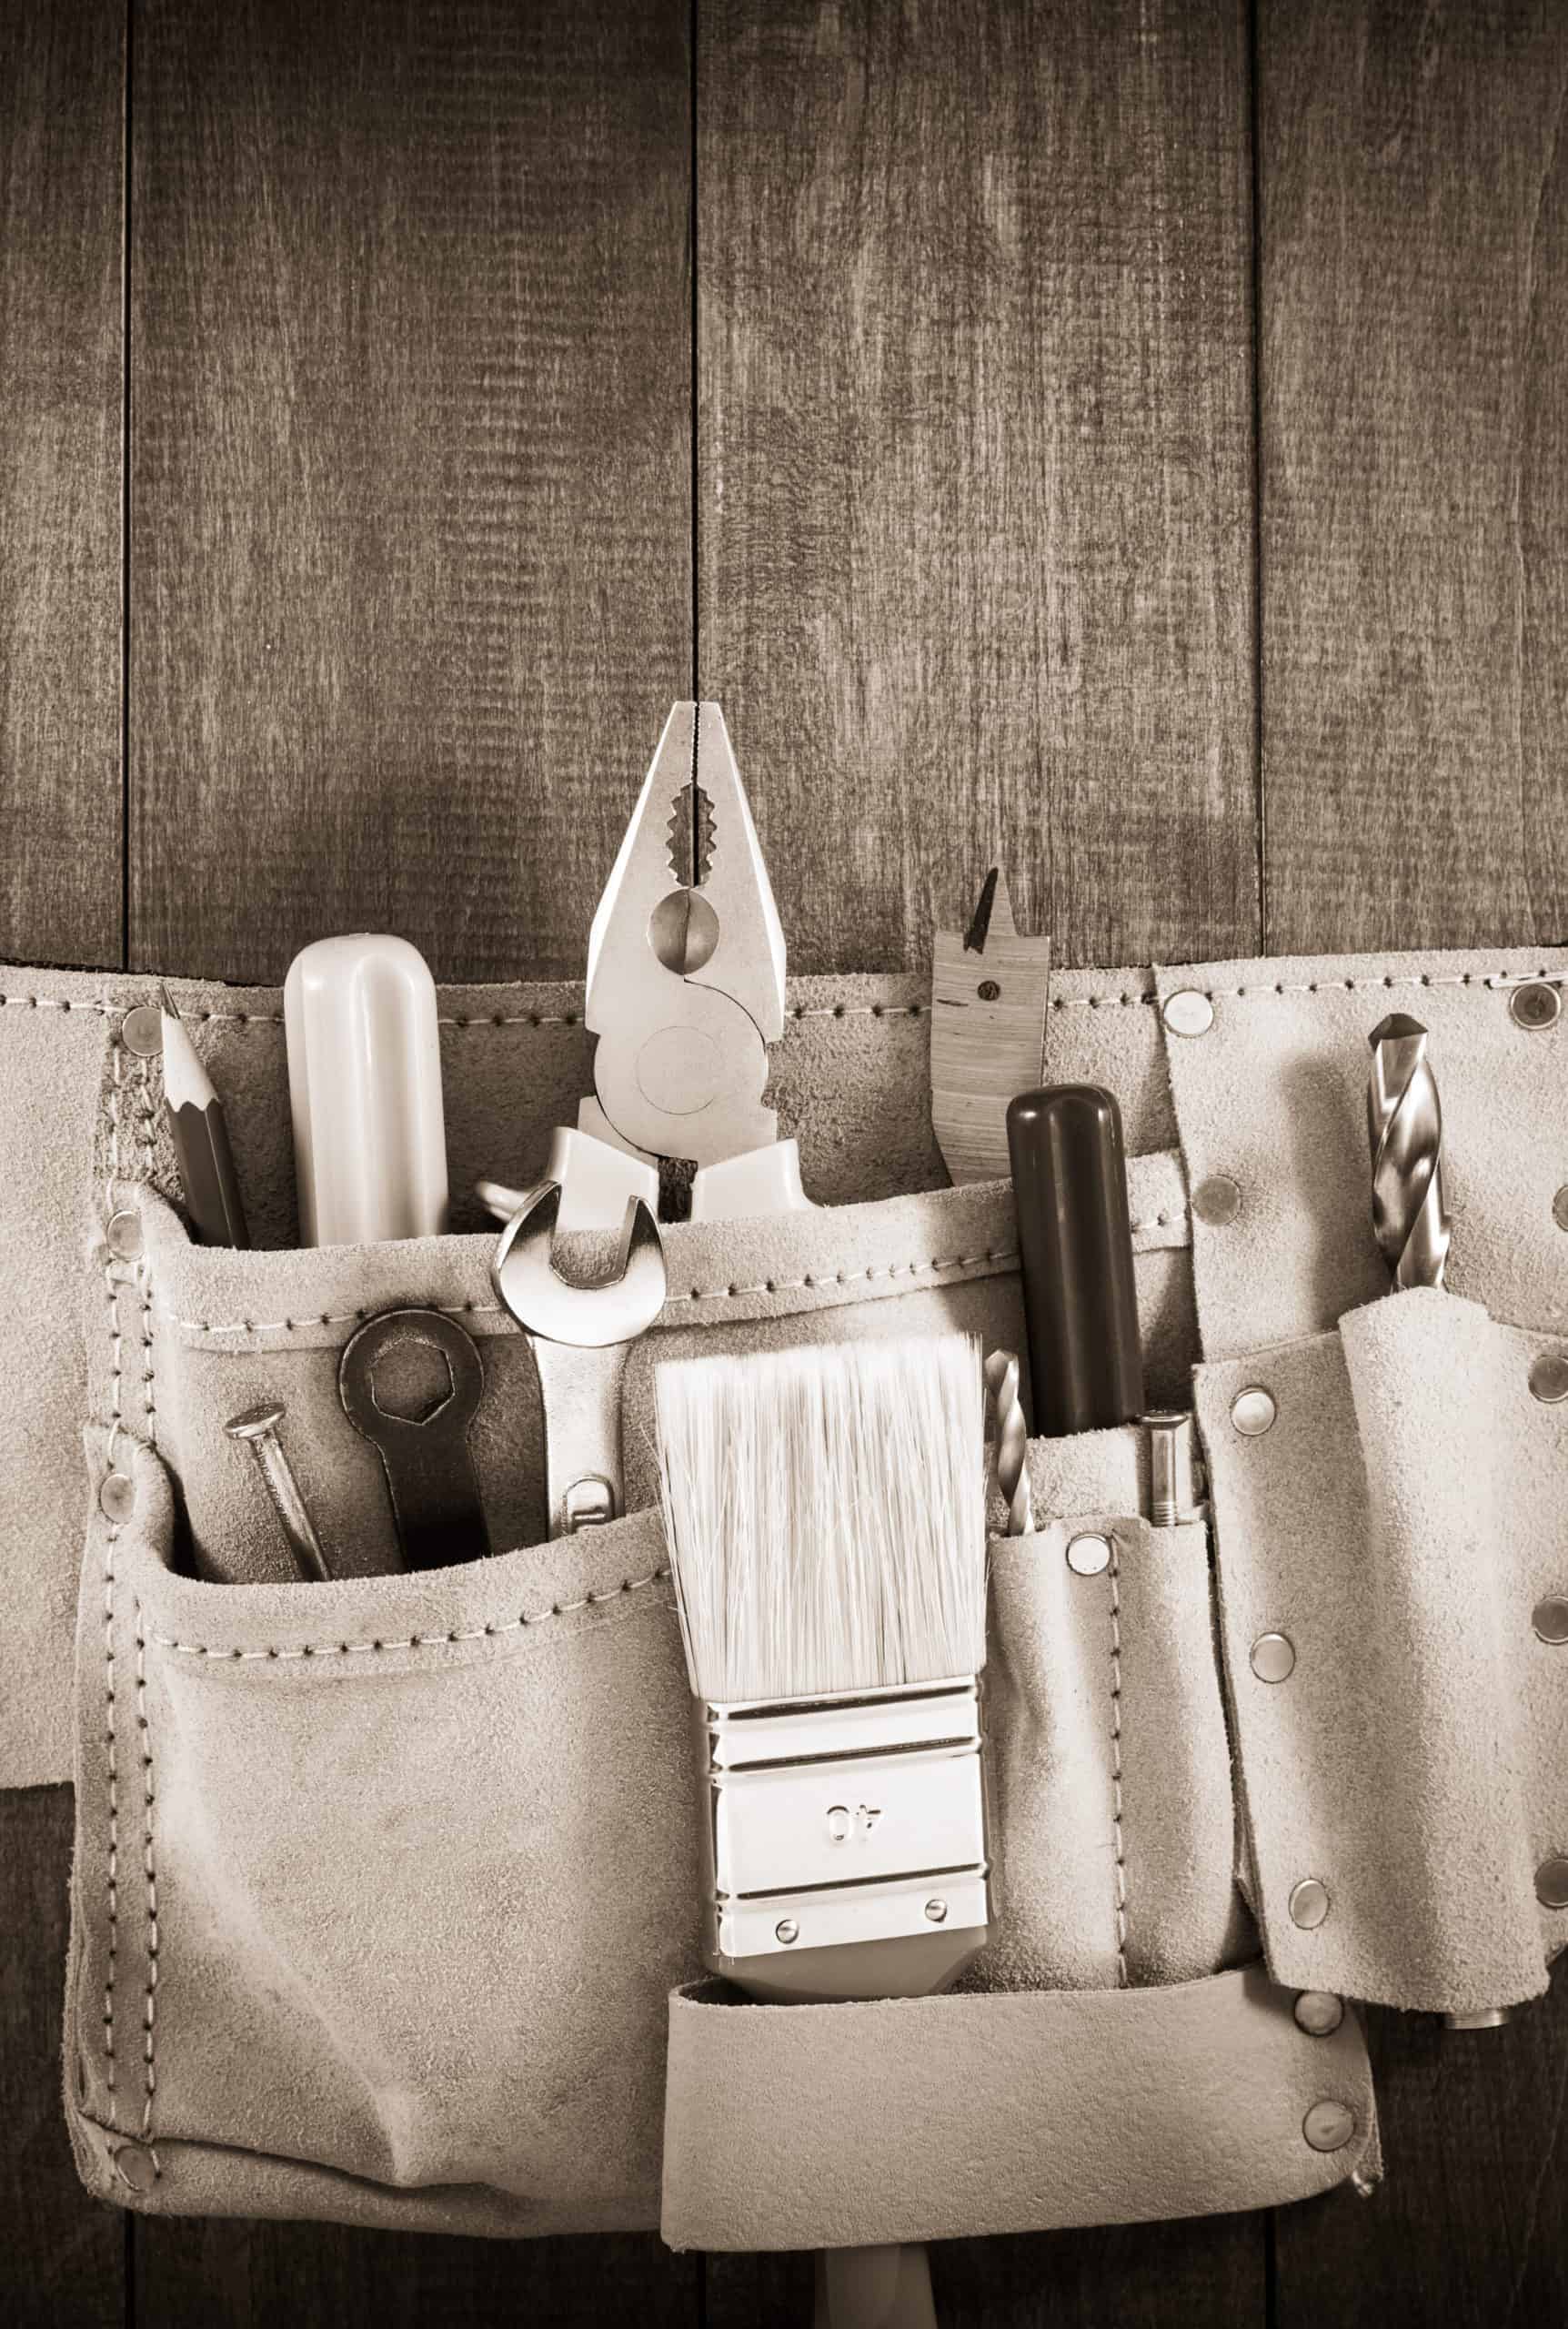 Different tools on a wall organizer